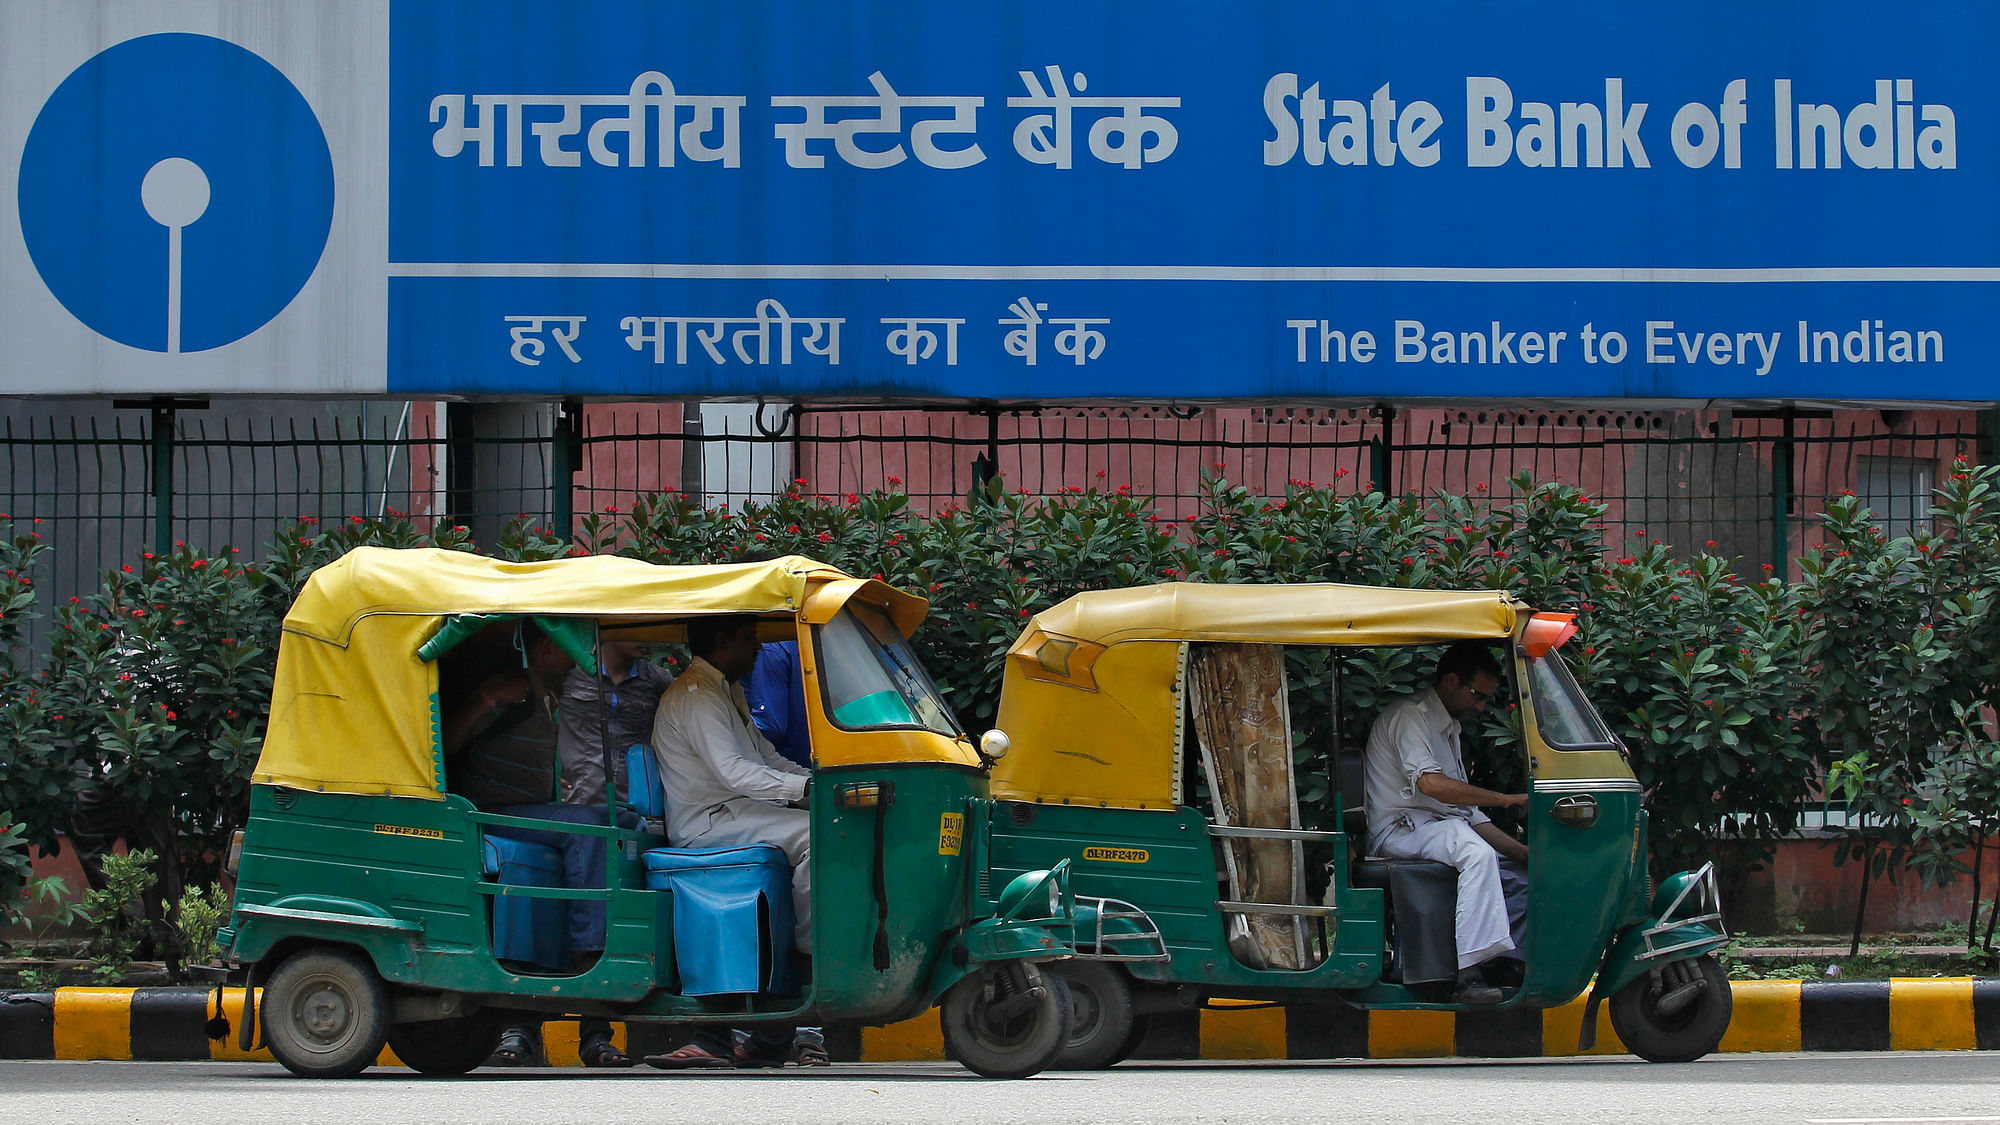 State Bank of India has leaked the data of millions of users.